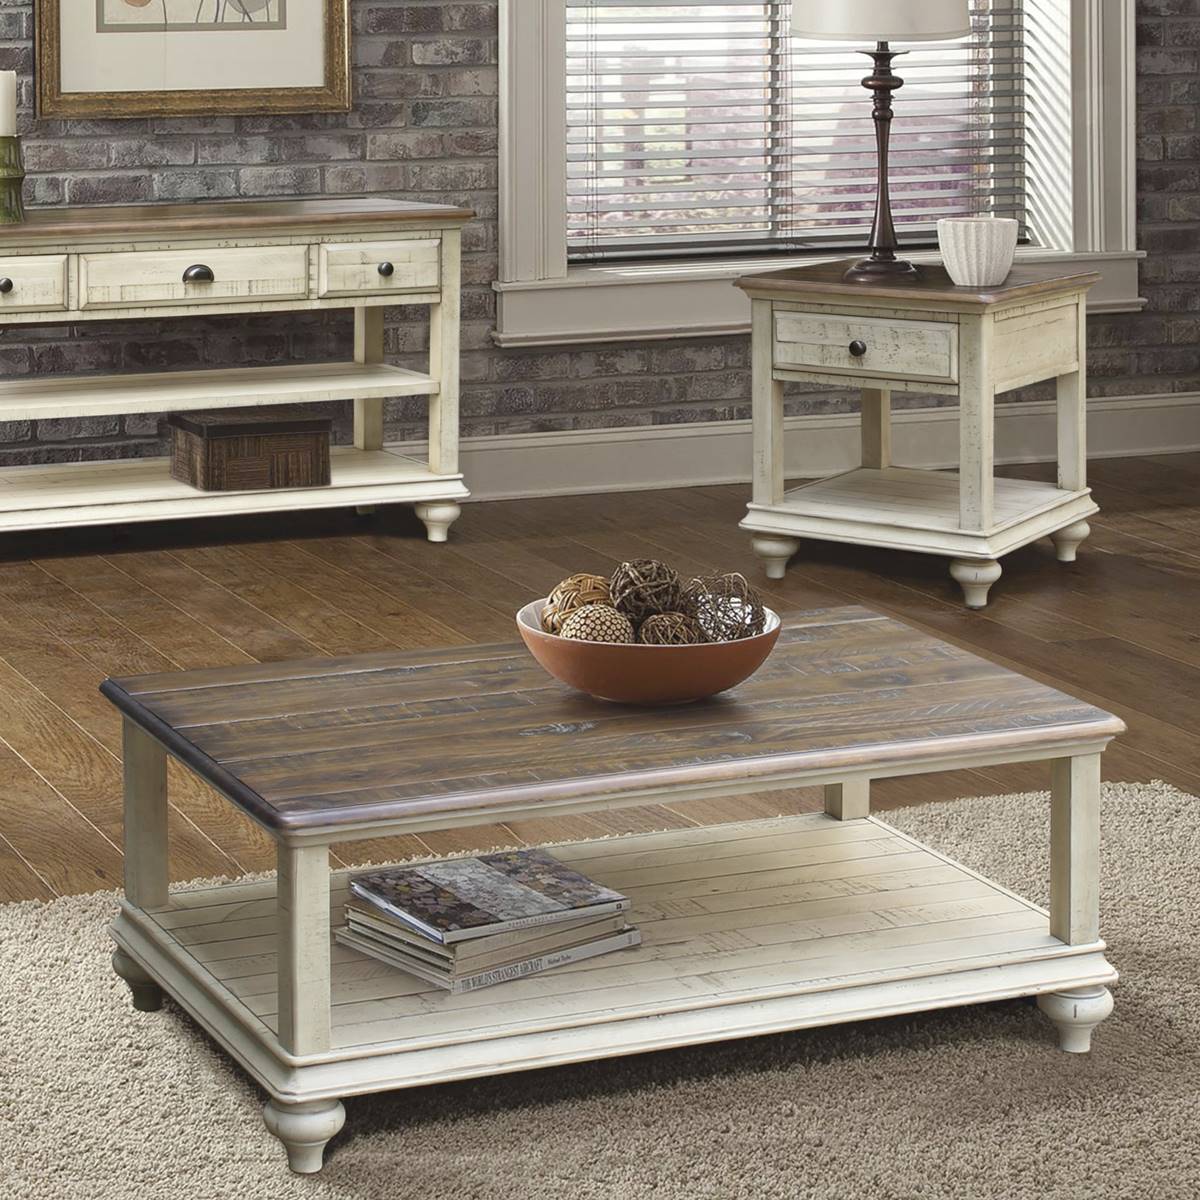 Besthom Shades Of Sand Distressed Rectangular End Table